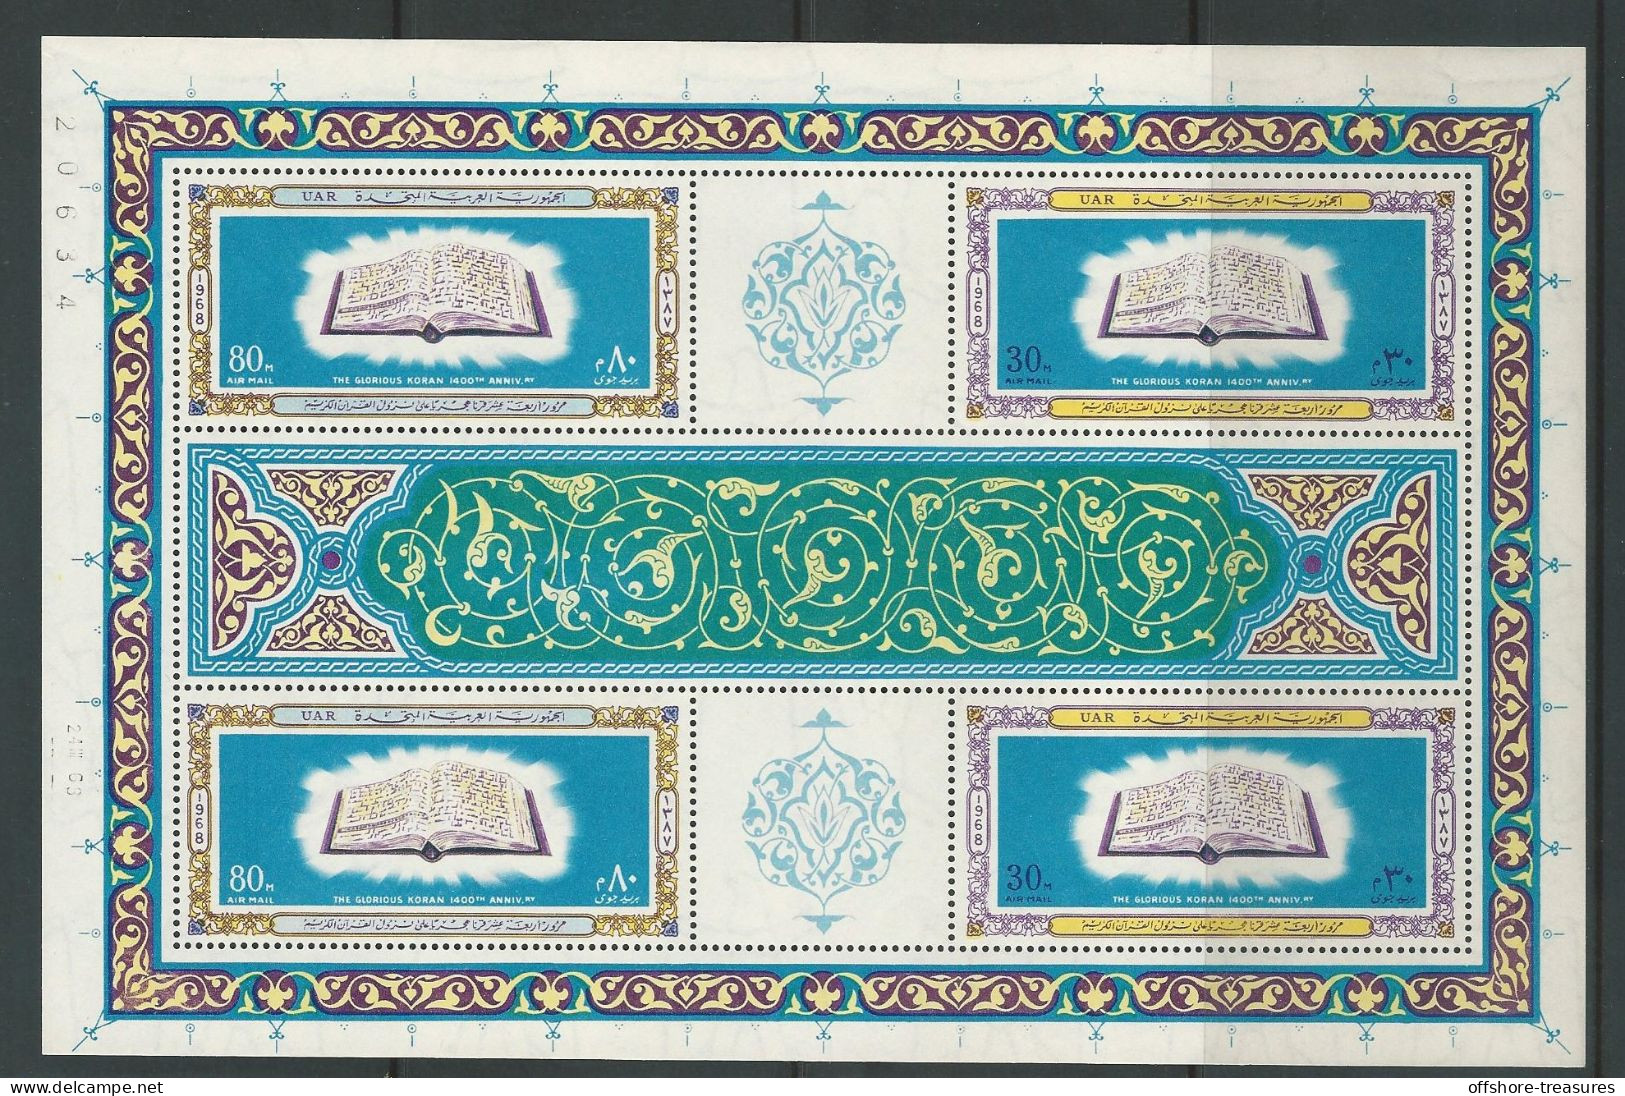 Egypt 1968 1400th Anniversary Of The Holy Koran Sheet-let /Sheet / 2 Stamp Set 80 & 30 Mills Air Mail - Neufs